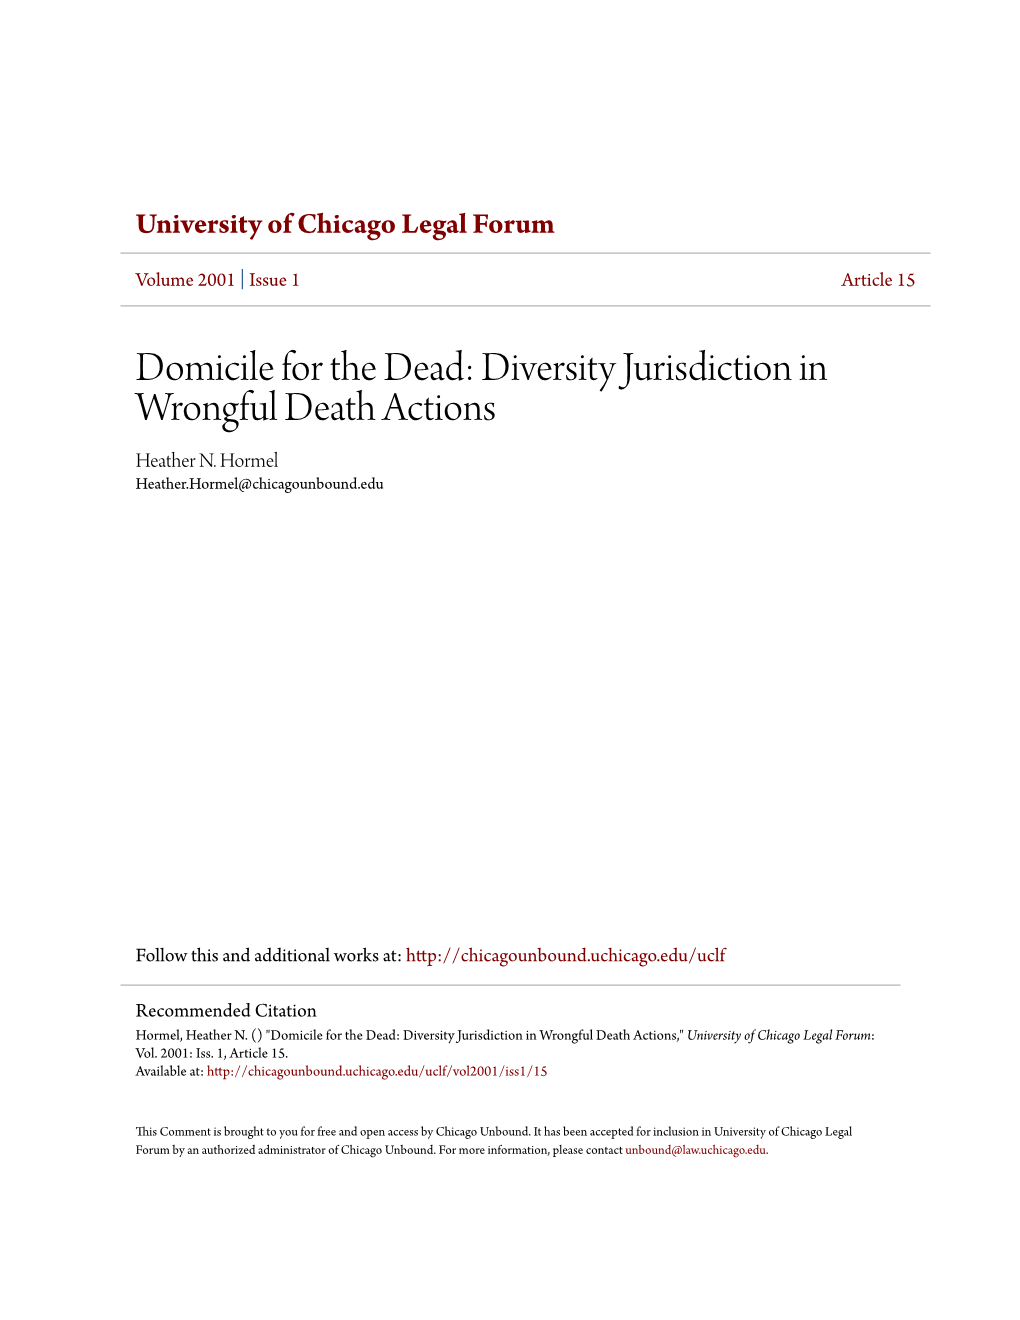 Domicile for the Dead: Diversity Jurisdiction in Wrongful Death Actions Heather N